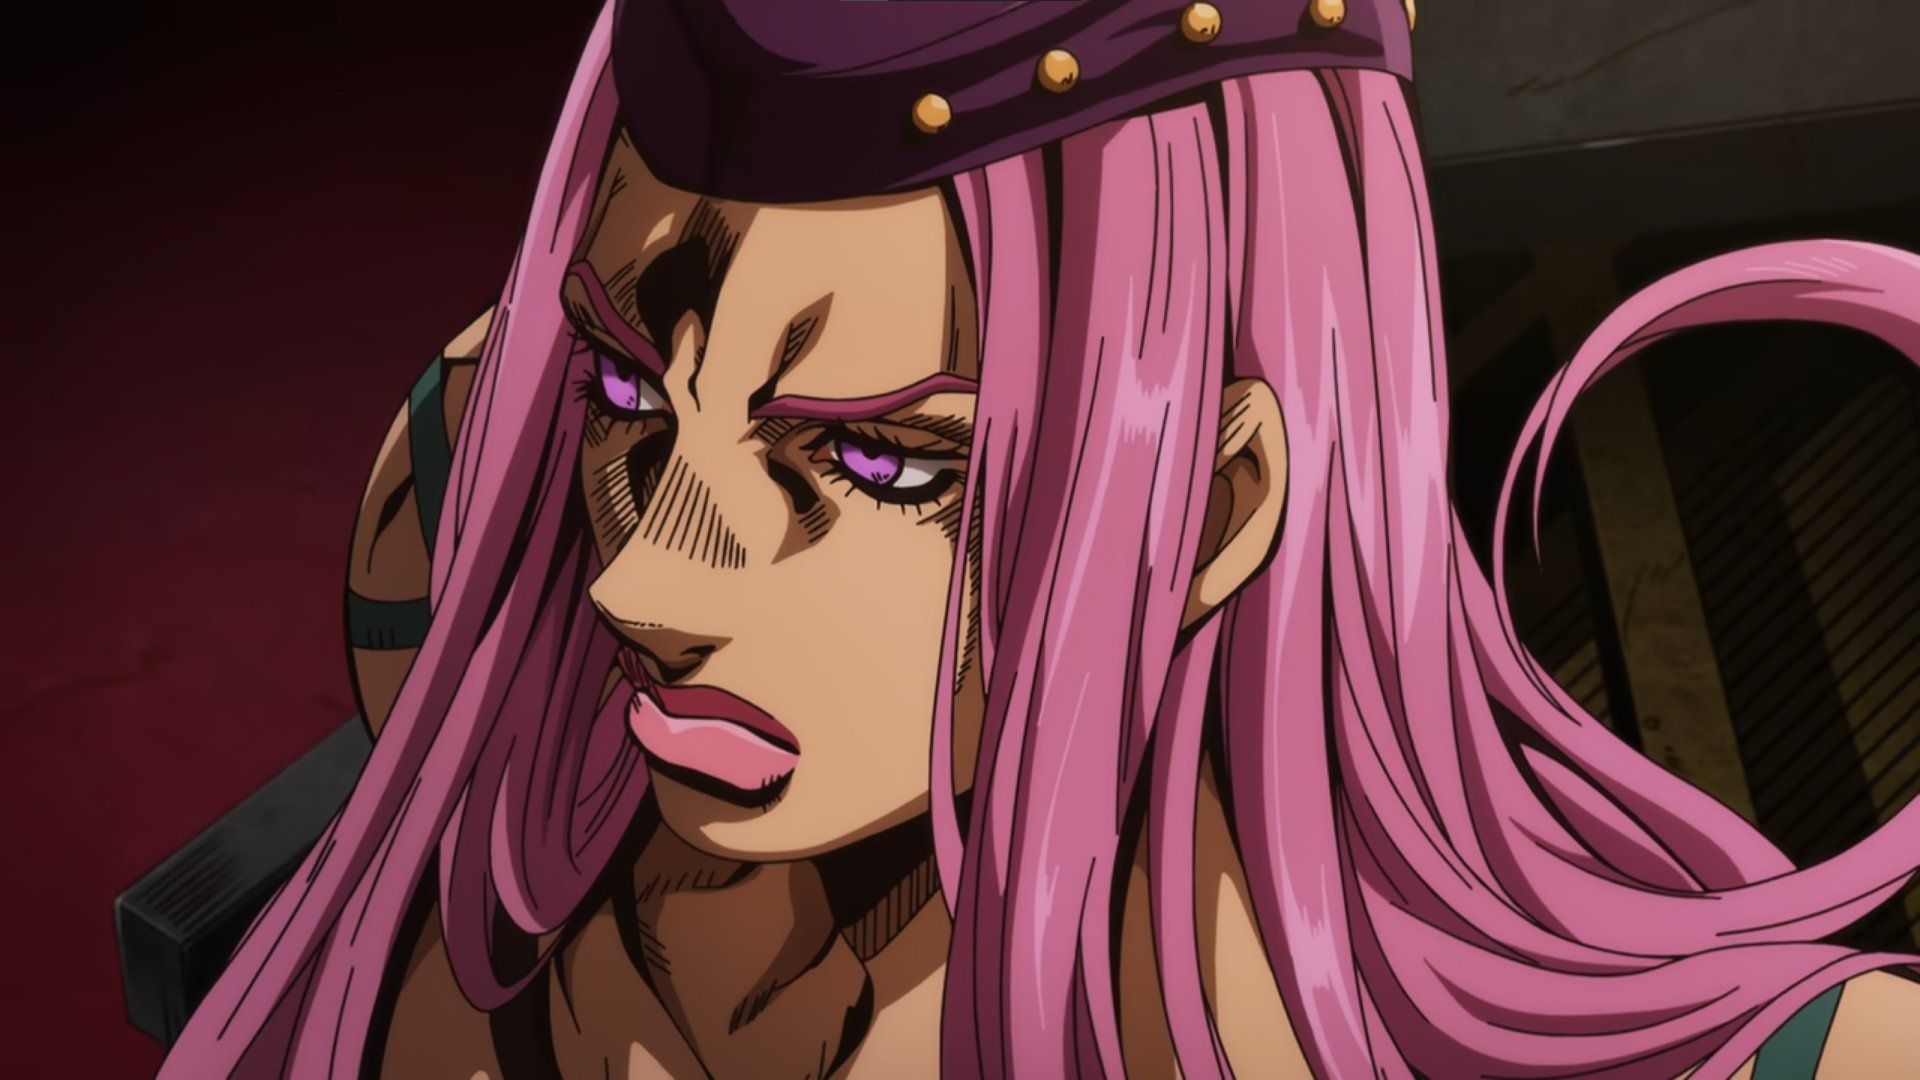 Anasui's Bizarre Transformation: How Shonen Jump's Homophobia Accidentally  Created JoJo's First Trans Character – OMG, Becky, Look At That Blog!